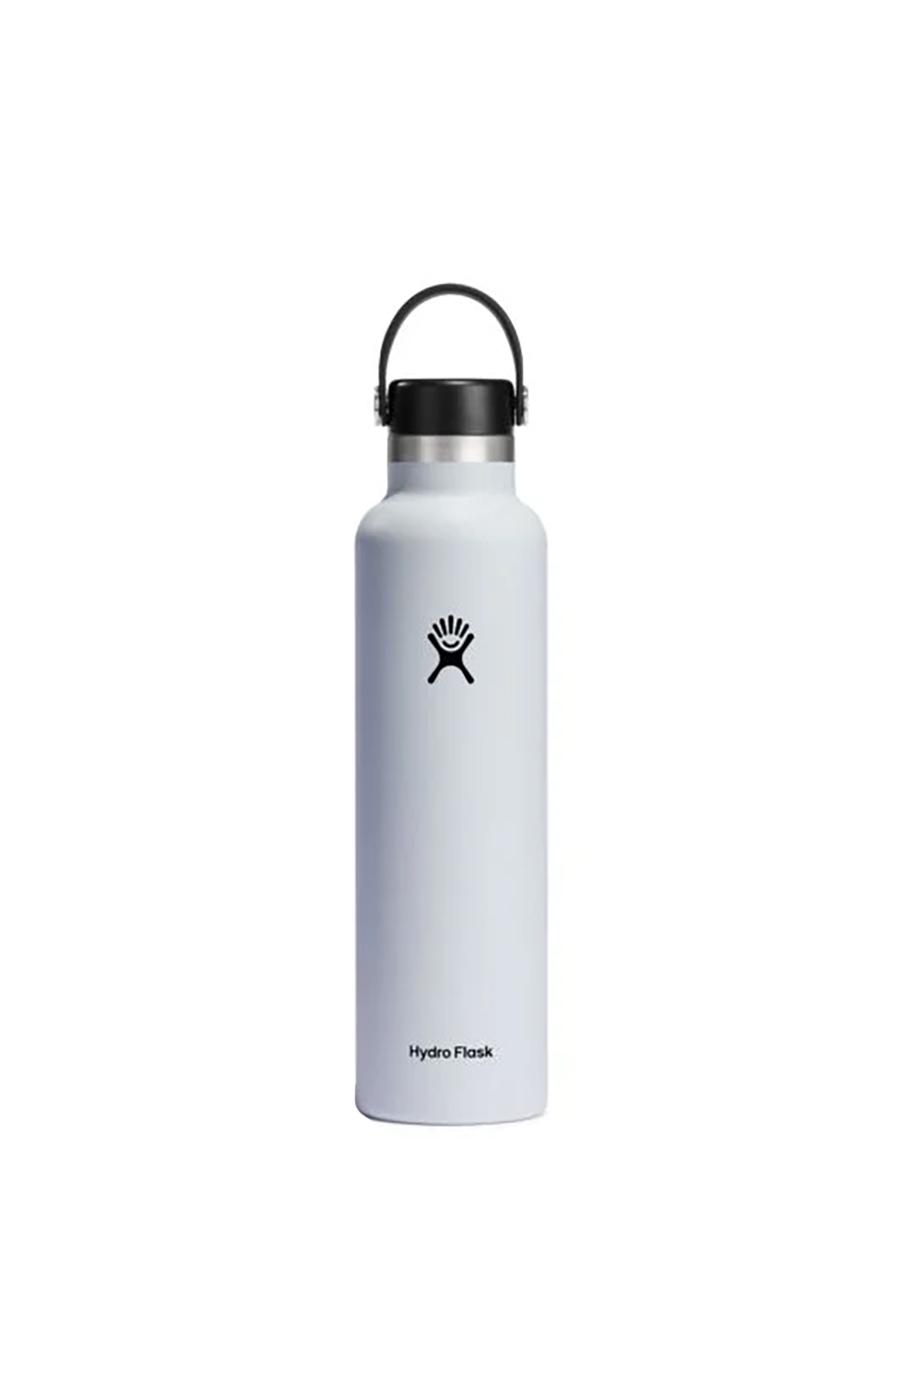 Hydro Flask Standard Mouth Water Bottle with Flex Cap - White; image 1 of 3